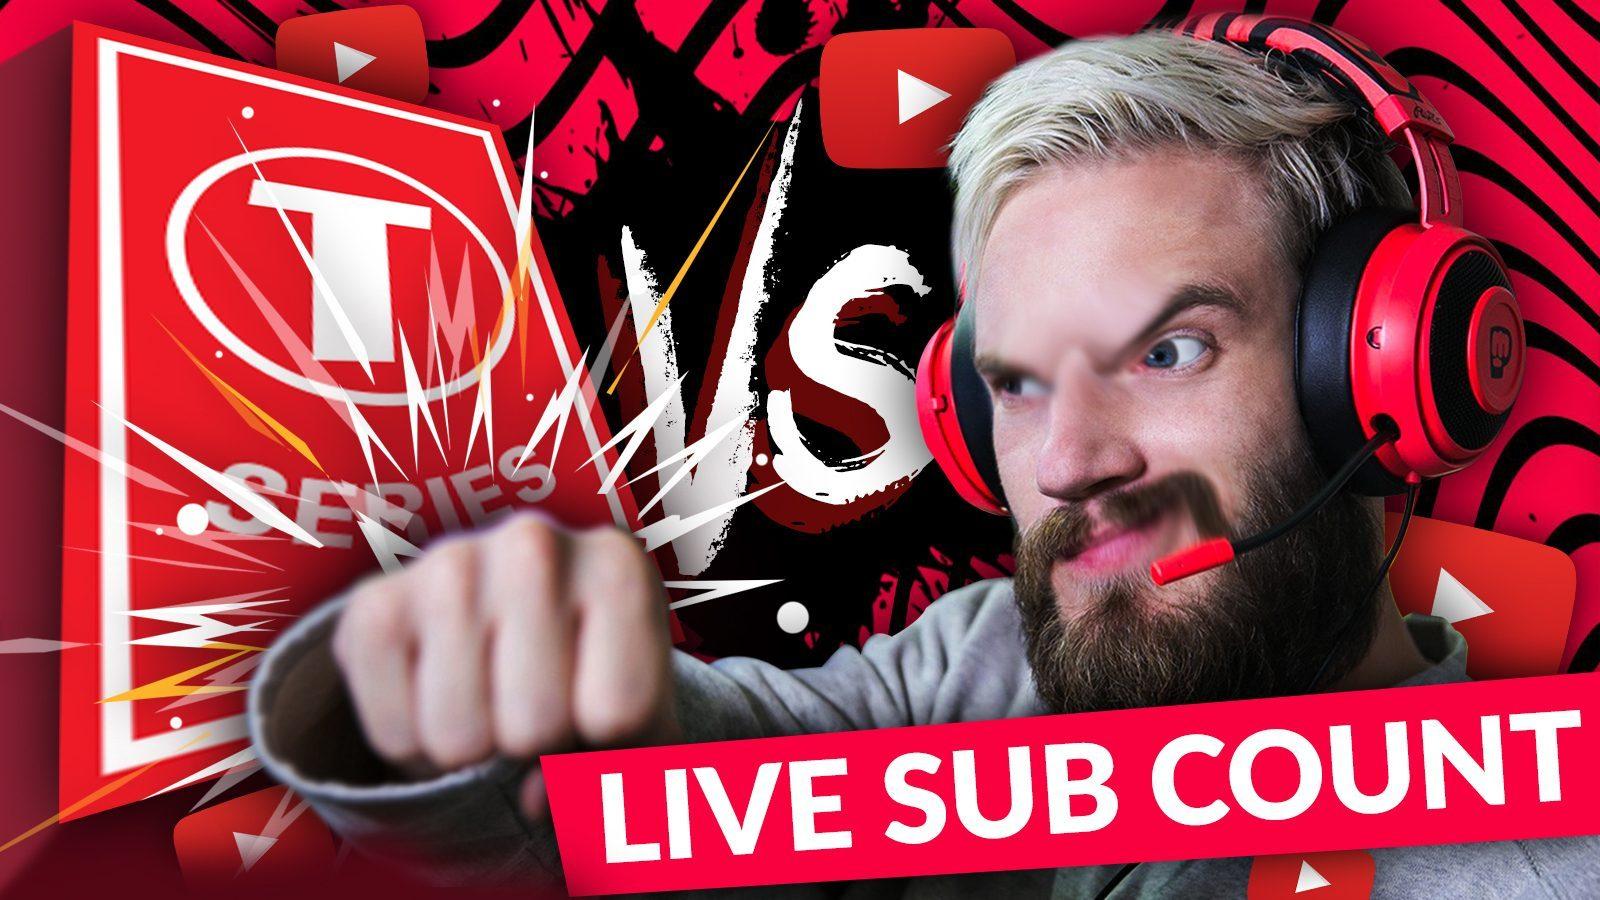 Top 50  Live Sub Count - PewDiePie VS T-Series & More!  Welcome to  the Top 50 Most Subscribed Channels on  24/7 Live Stream! This  educational stream is a real-time